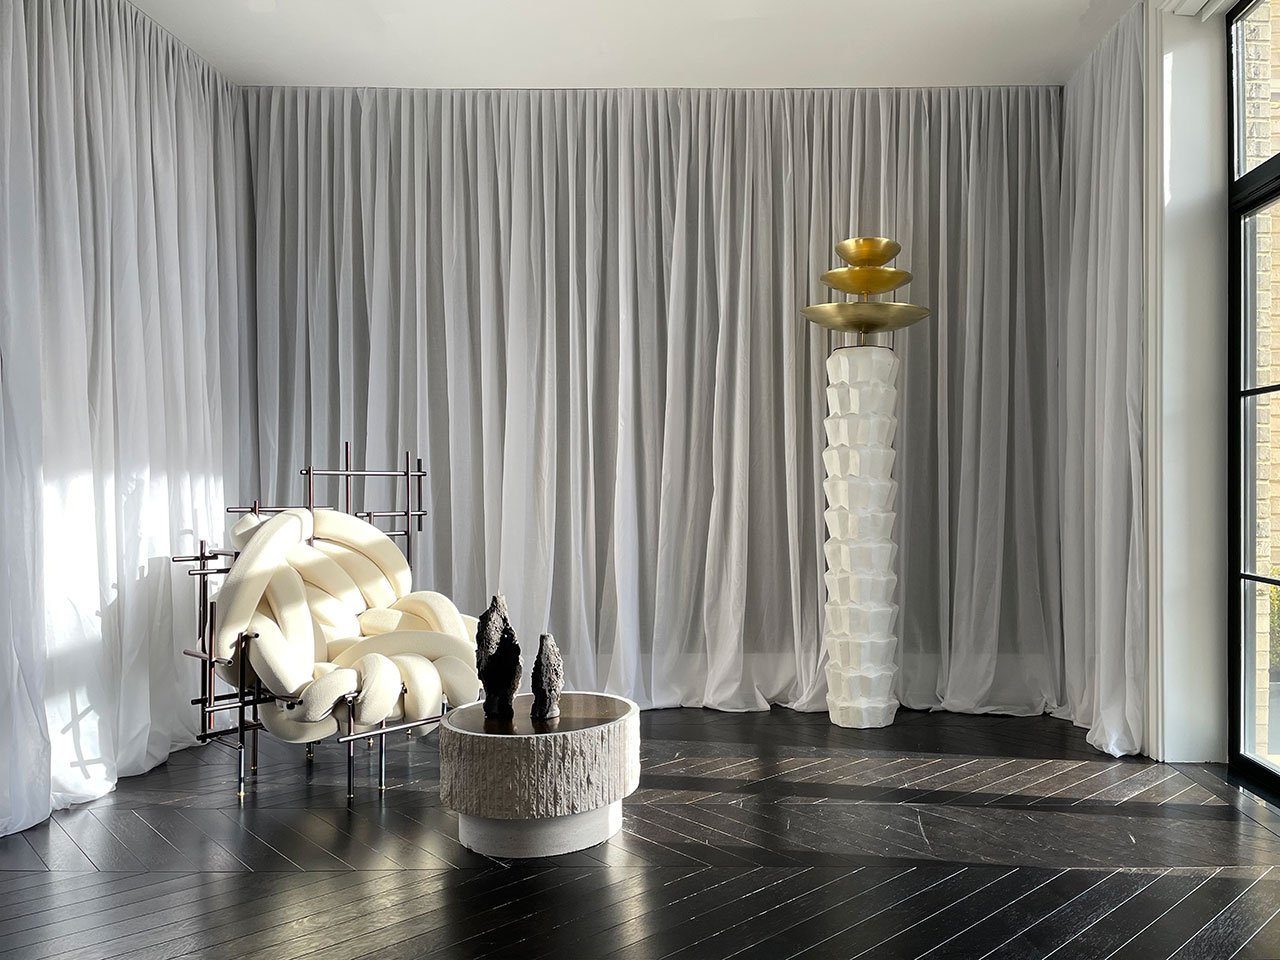 Galerie Philia at Walker Tower, Chelsea, New York. Courtesy of Galerie Philia.
Featured:
Evan Fay, Lawless Fauteuil, 2020. Brass connections foam, scuba knit fabric, steel pipe. 111 x 80 x 120 cm.
Frédéric Saulou, Ambiguë coffee table, 2020. Ornamental stone, Magny, patinated brass. H 34, D 60 cm.
Niclas Wolf, Geoprimitive ceramic and brass candelstand Candleholder, 2020. Ceramic and brass.
Rooms, Miami Floor Lamp, 2018. Combined composite and brass.